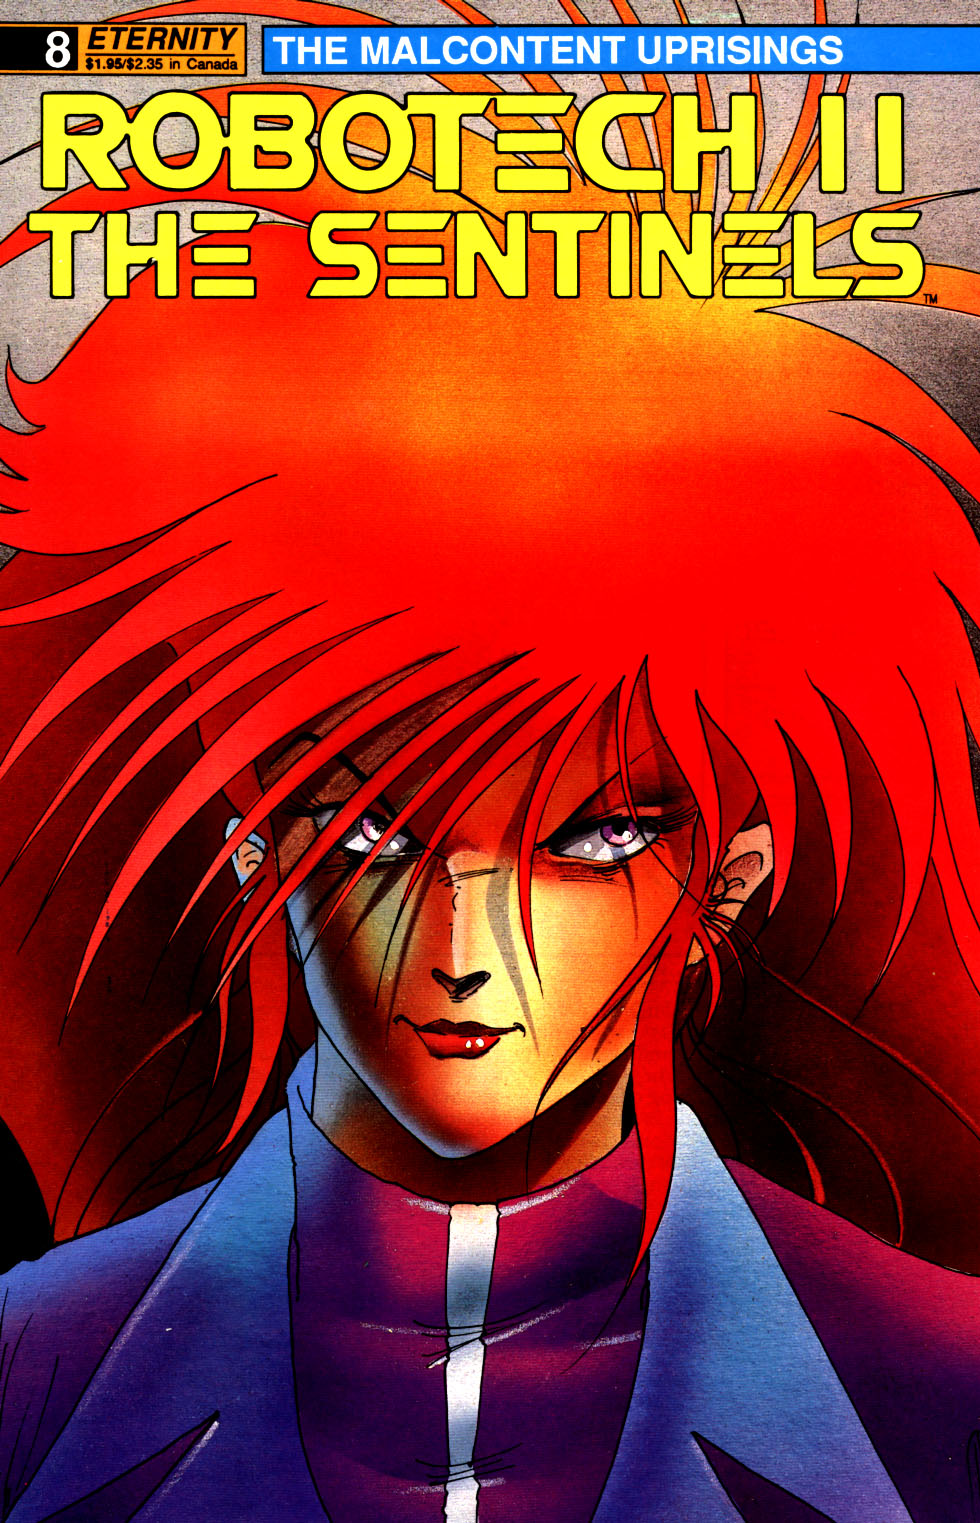 Read online Robotech II: The Sentinels - The Malcontent Uprisings comic -  Issue #8 - 1